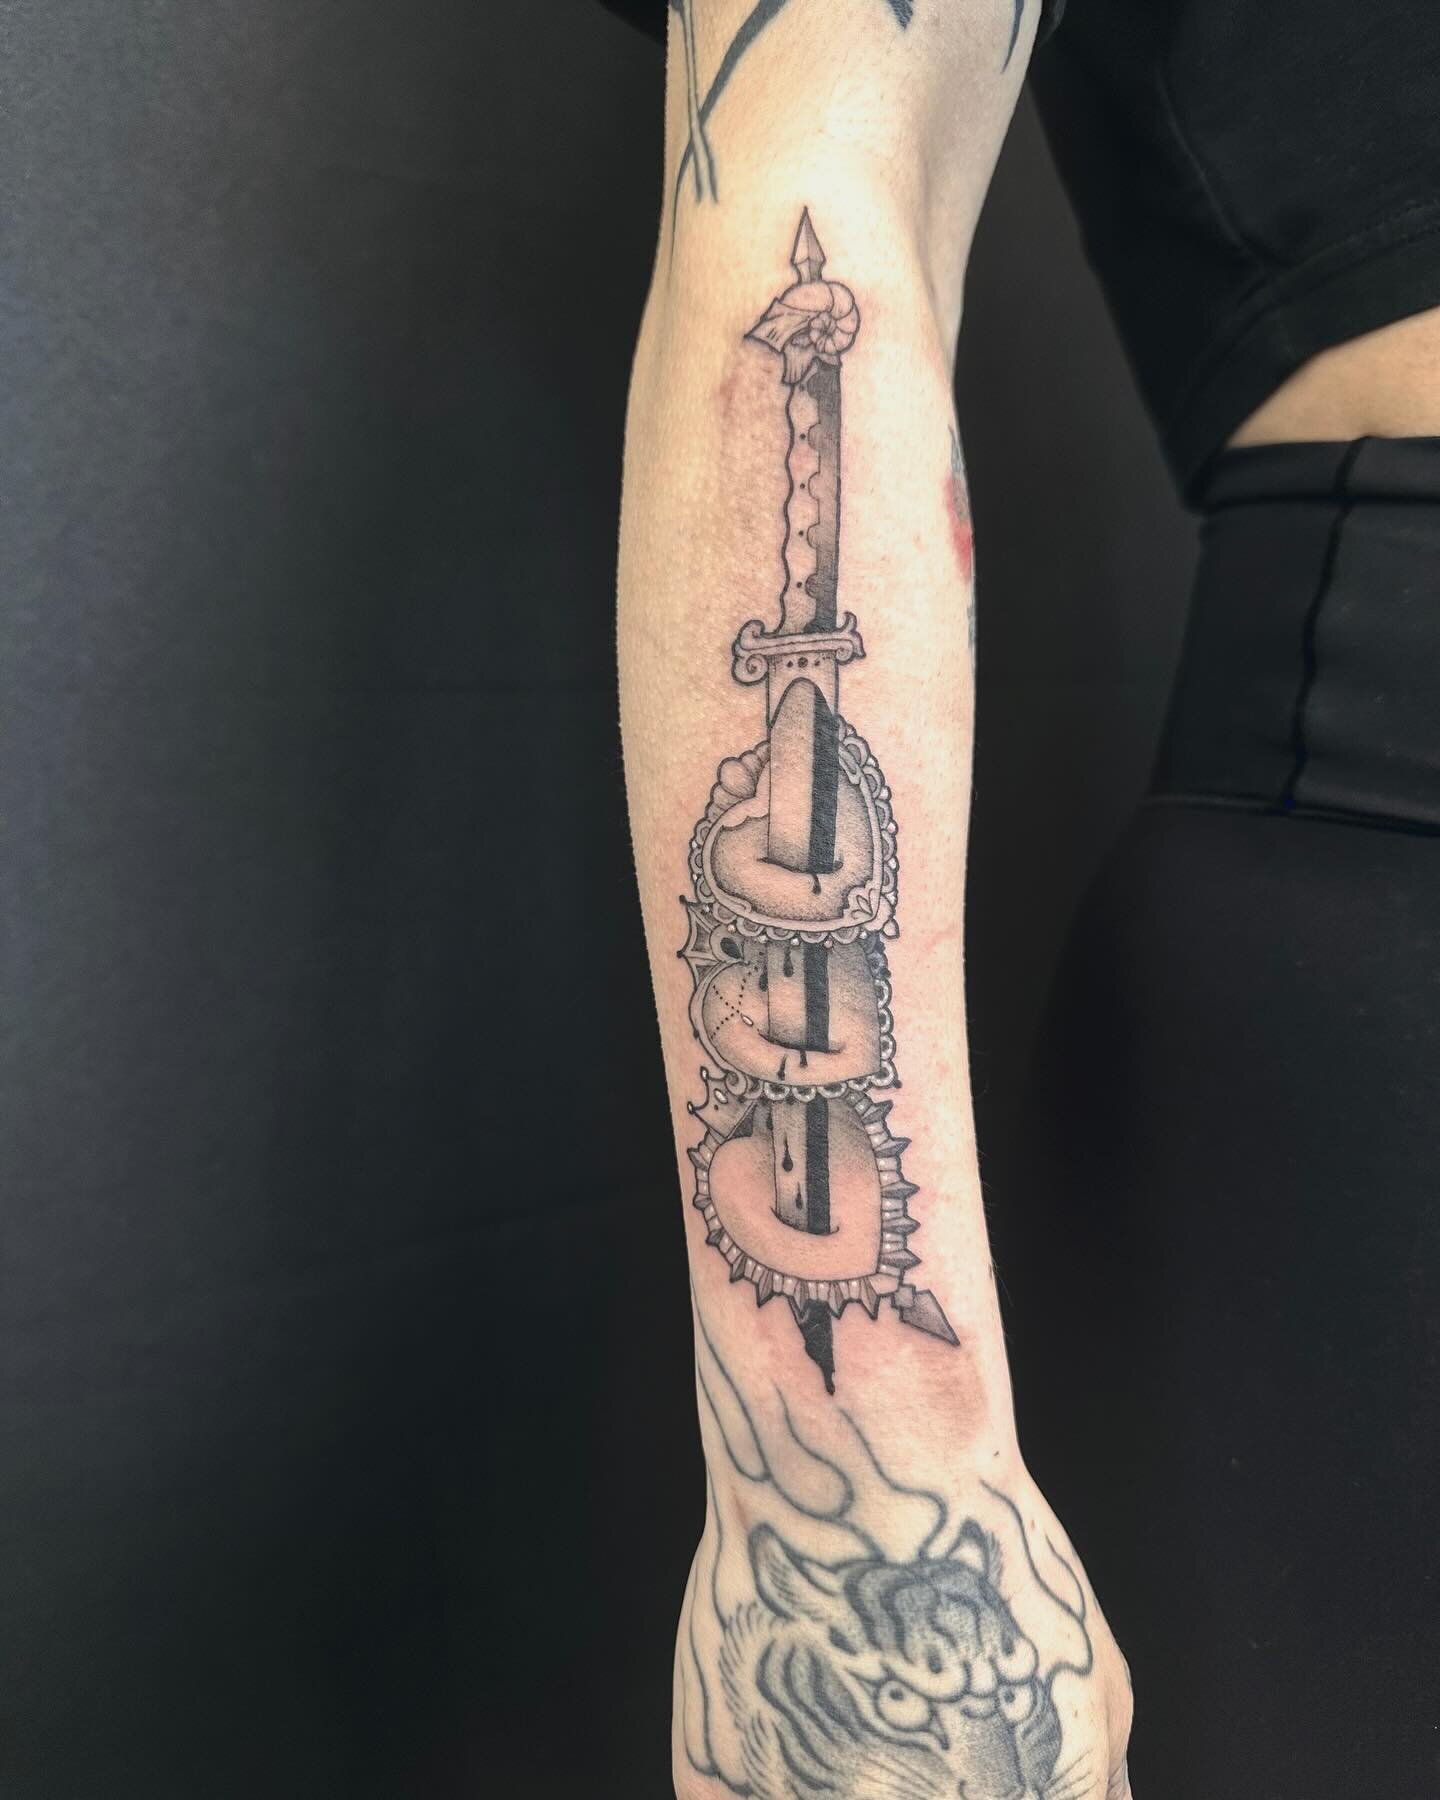 ⚜️arm adornment⚜️
Thanks so much for coming in!
.
.
.
.
.
.
.
.
.
.
.
.
#tattoo #tattoos #witchy #witchesofinstagram #pagan #knife #hearts #ornamental